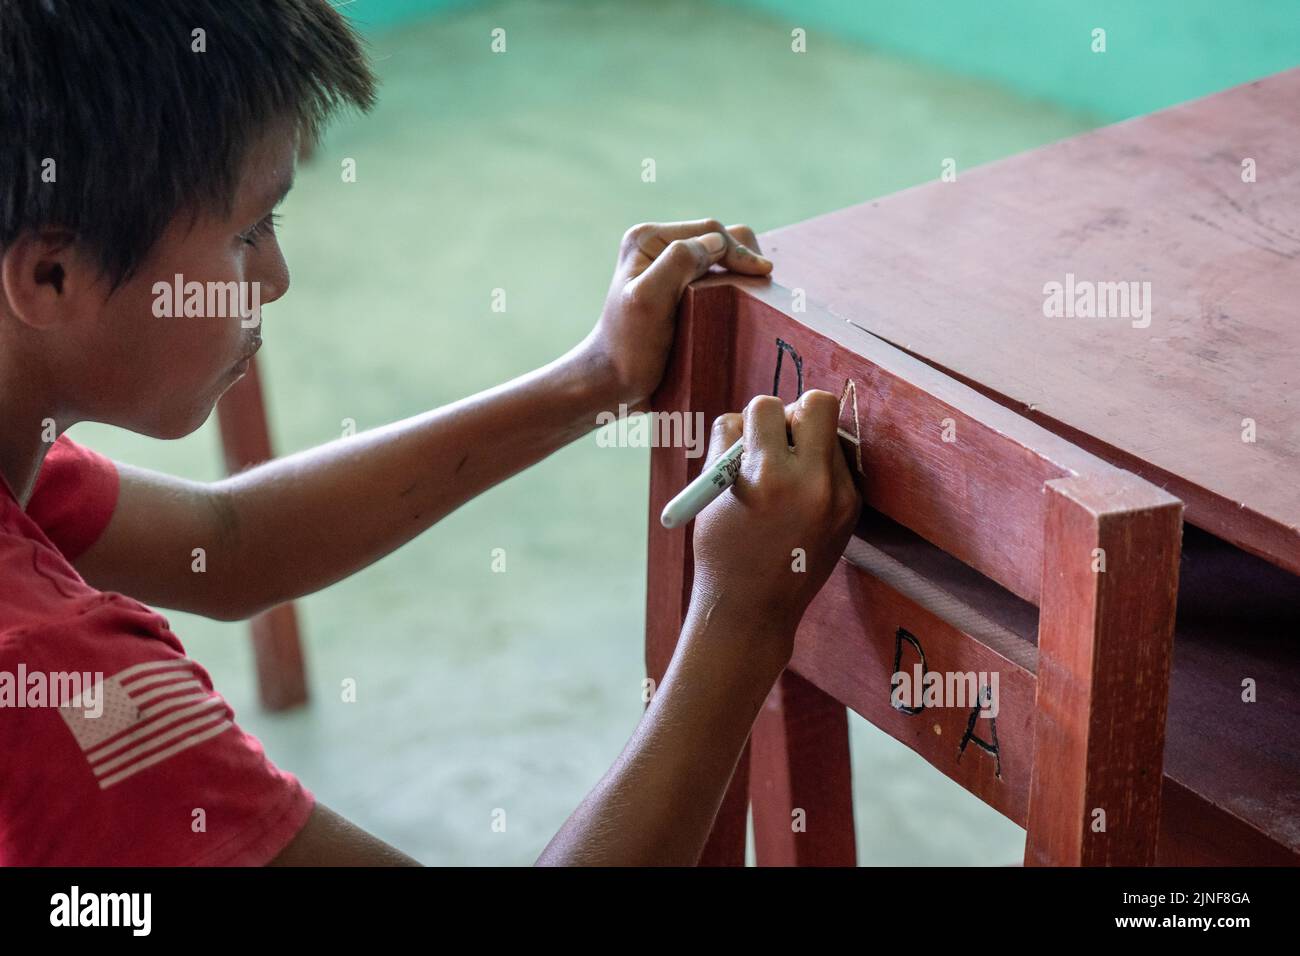 A riberenos student carves his initials into a donated desk and chair in the Peruvian Amazon Stock Photo